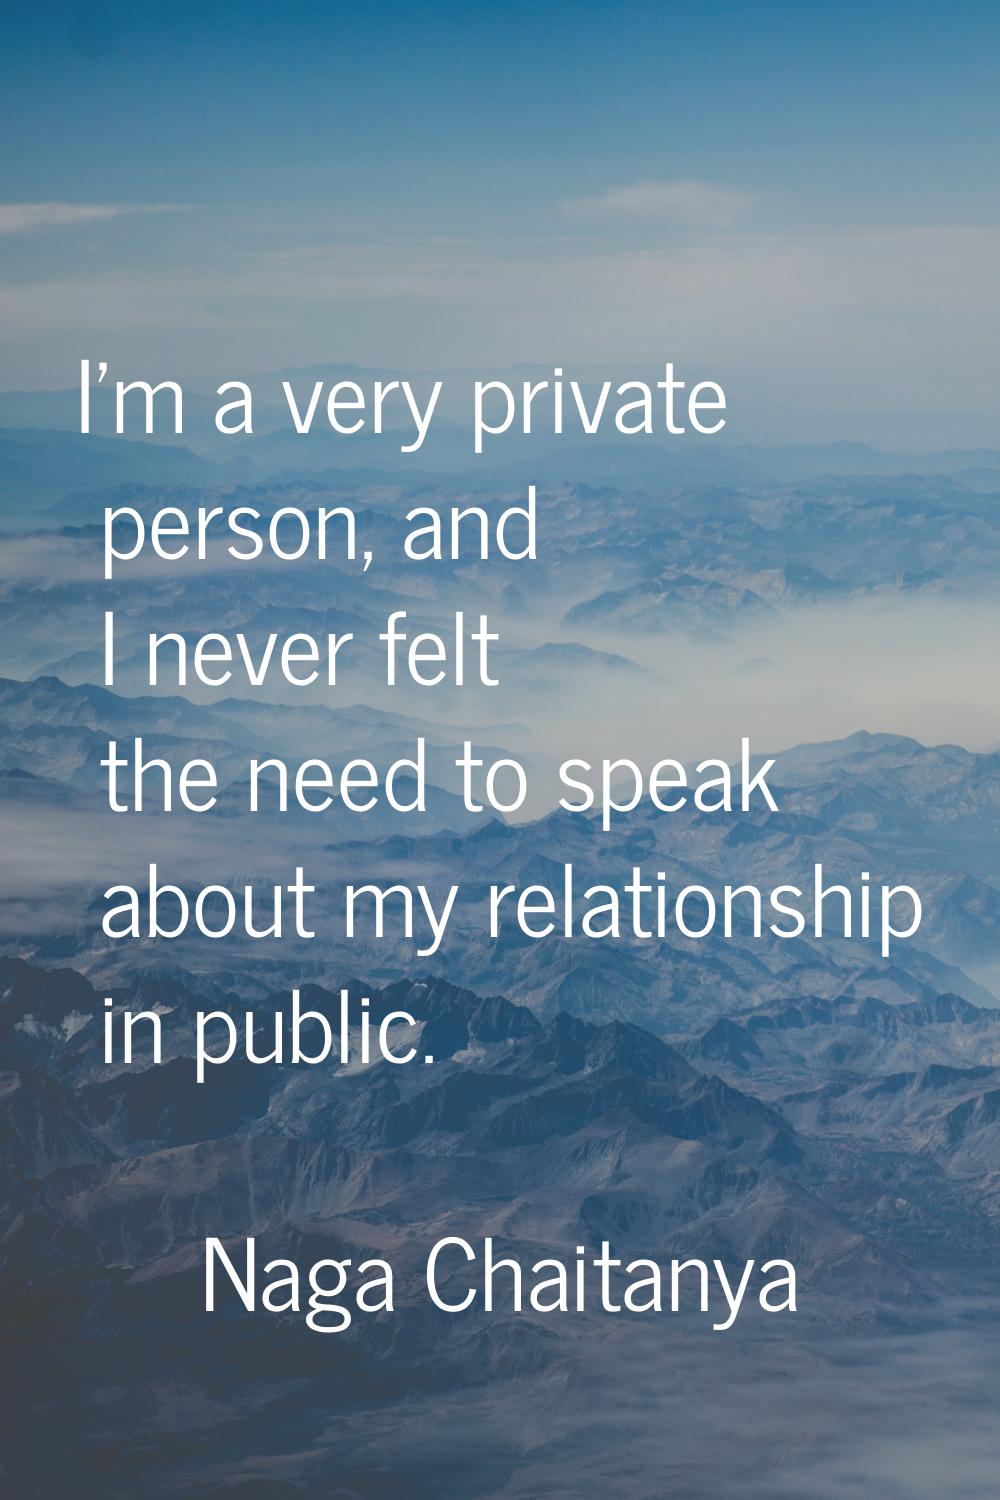 I'm a very private person, and I never felt the need to speak about my relationship in public.